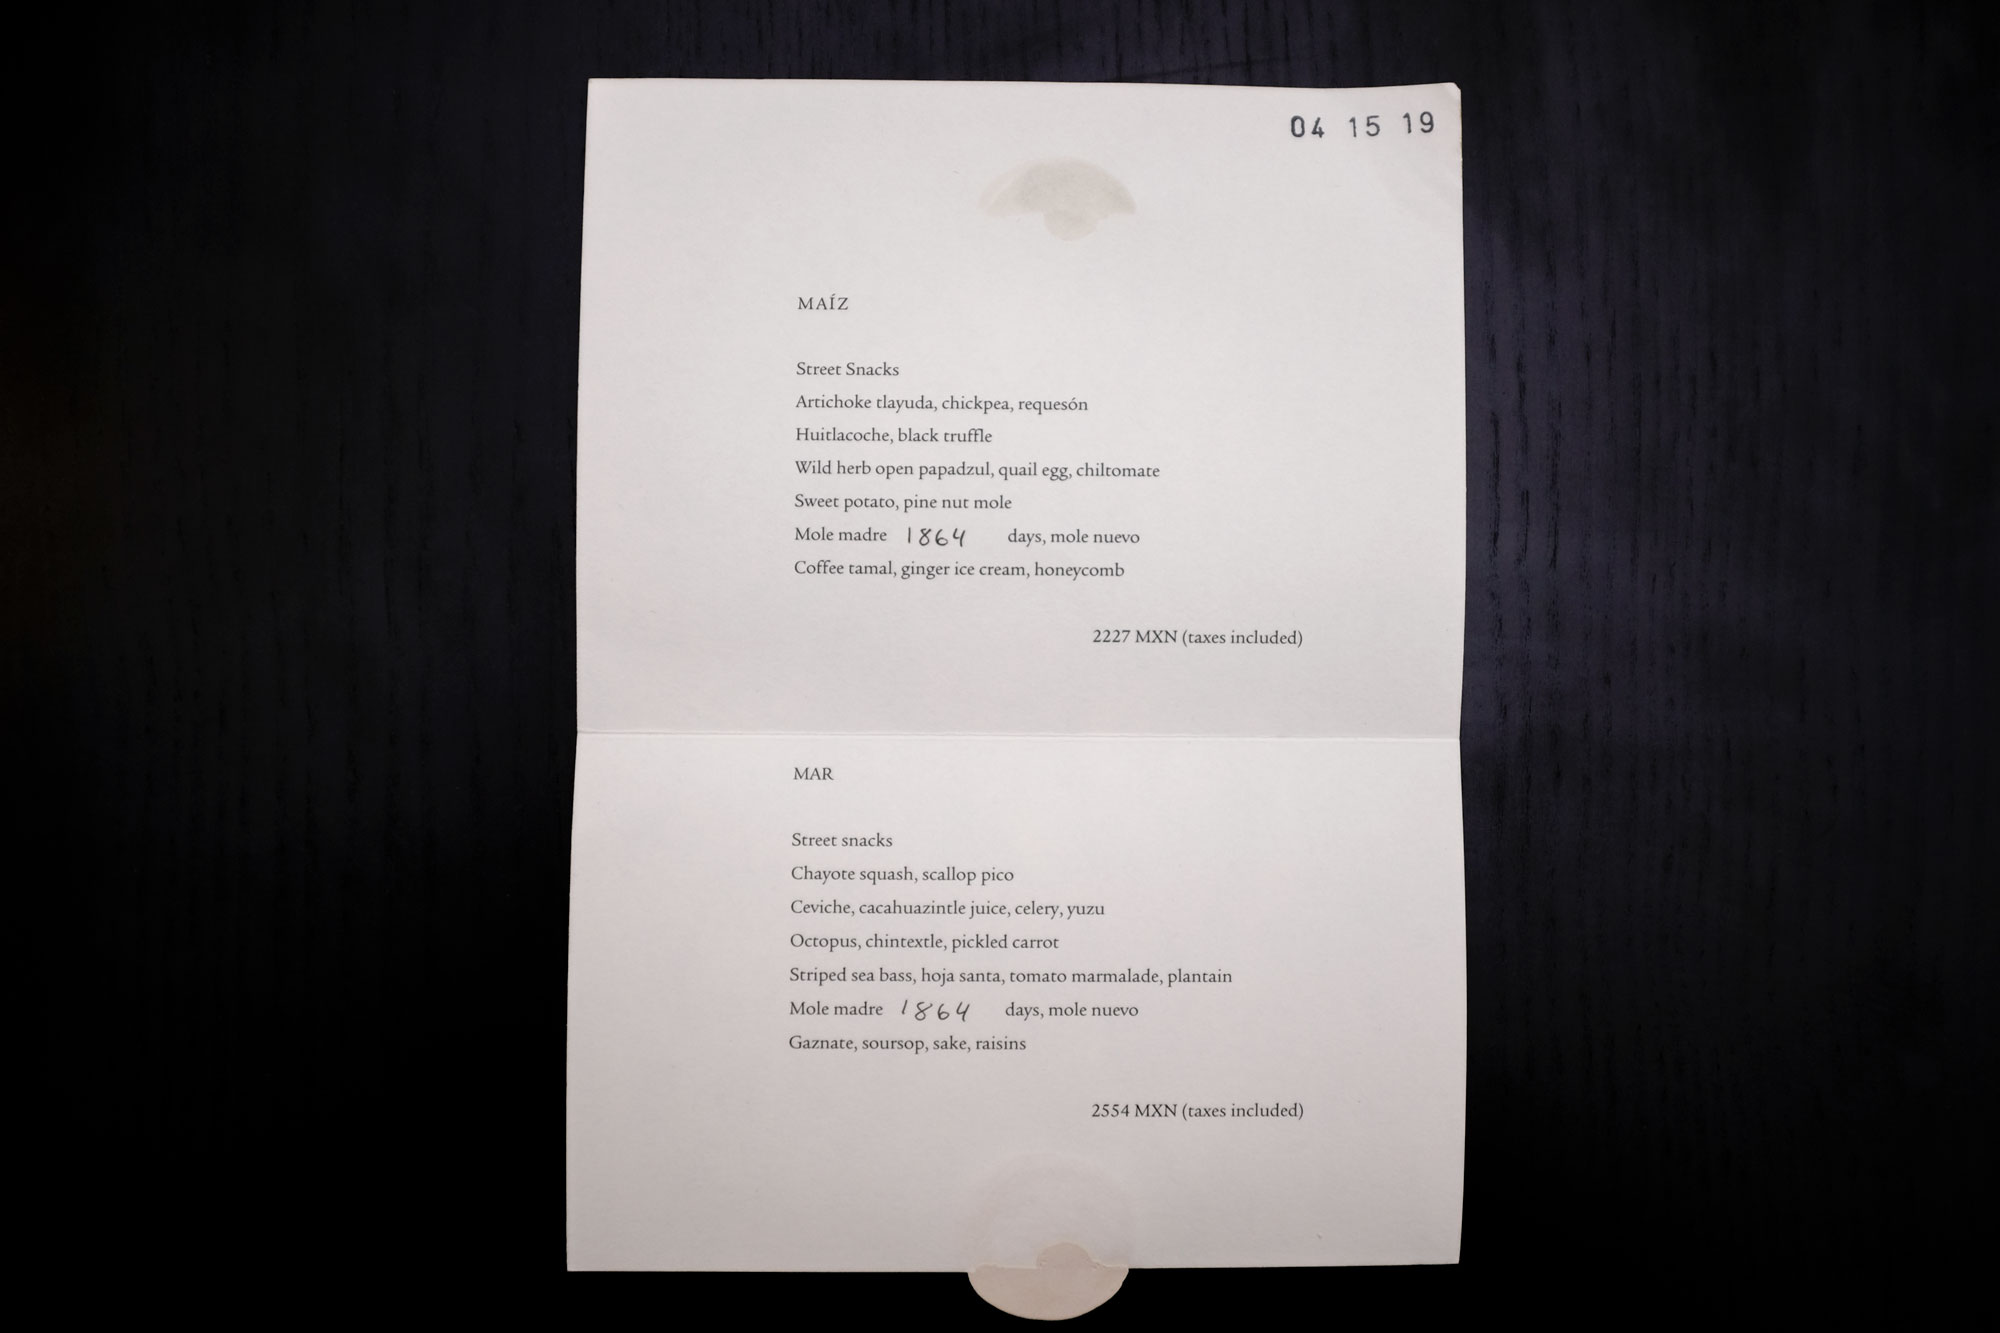 The Pujol Menu from 4-15-19